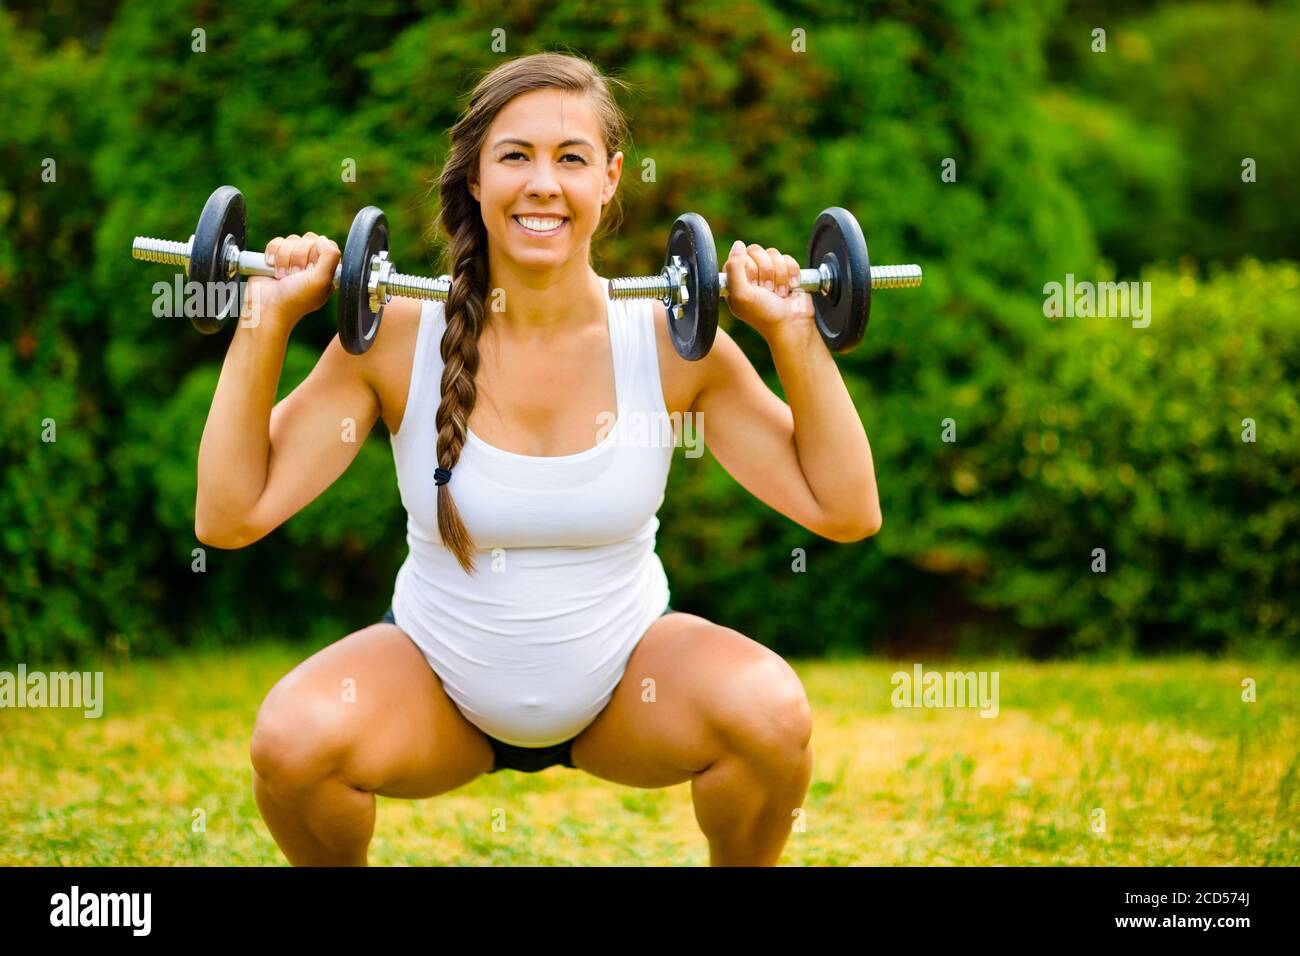 Smiling Pregnant Woman Doing Squat To Shoulder Press Using Dumbbells Stock Photo